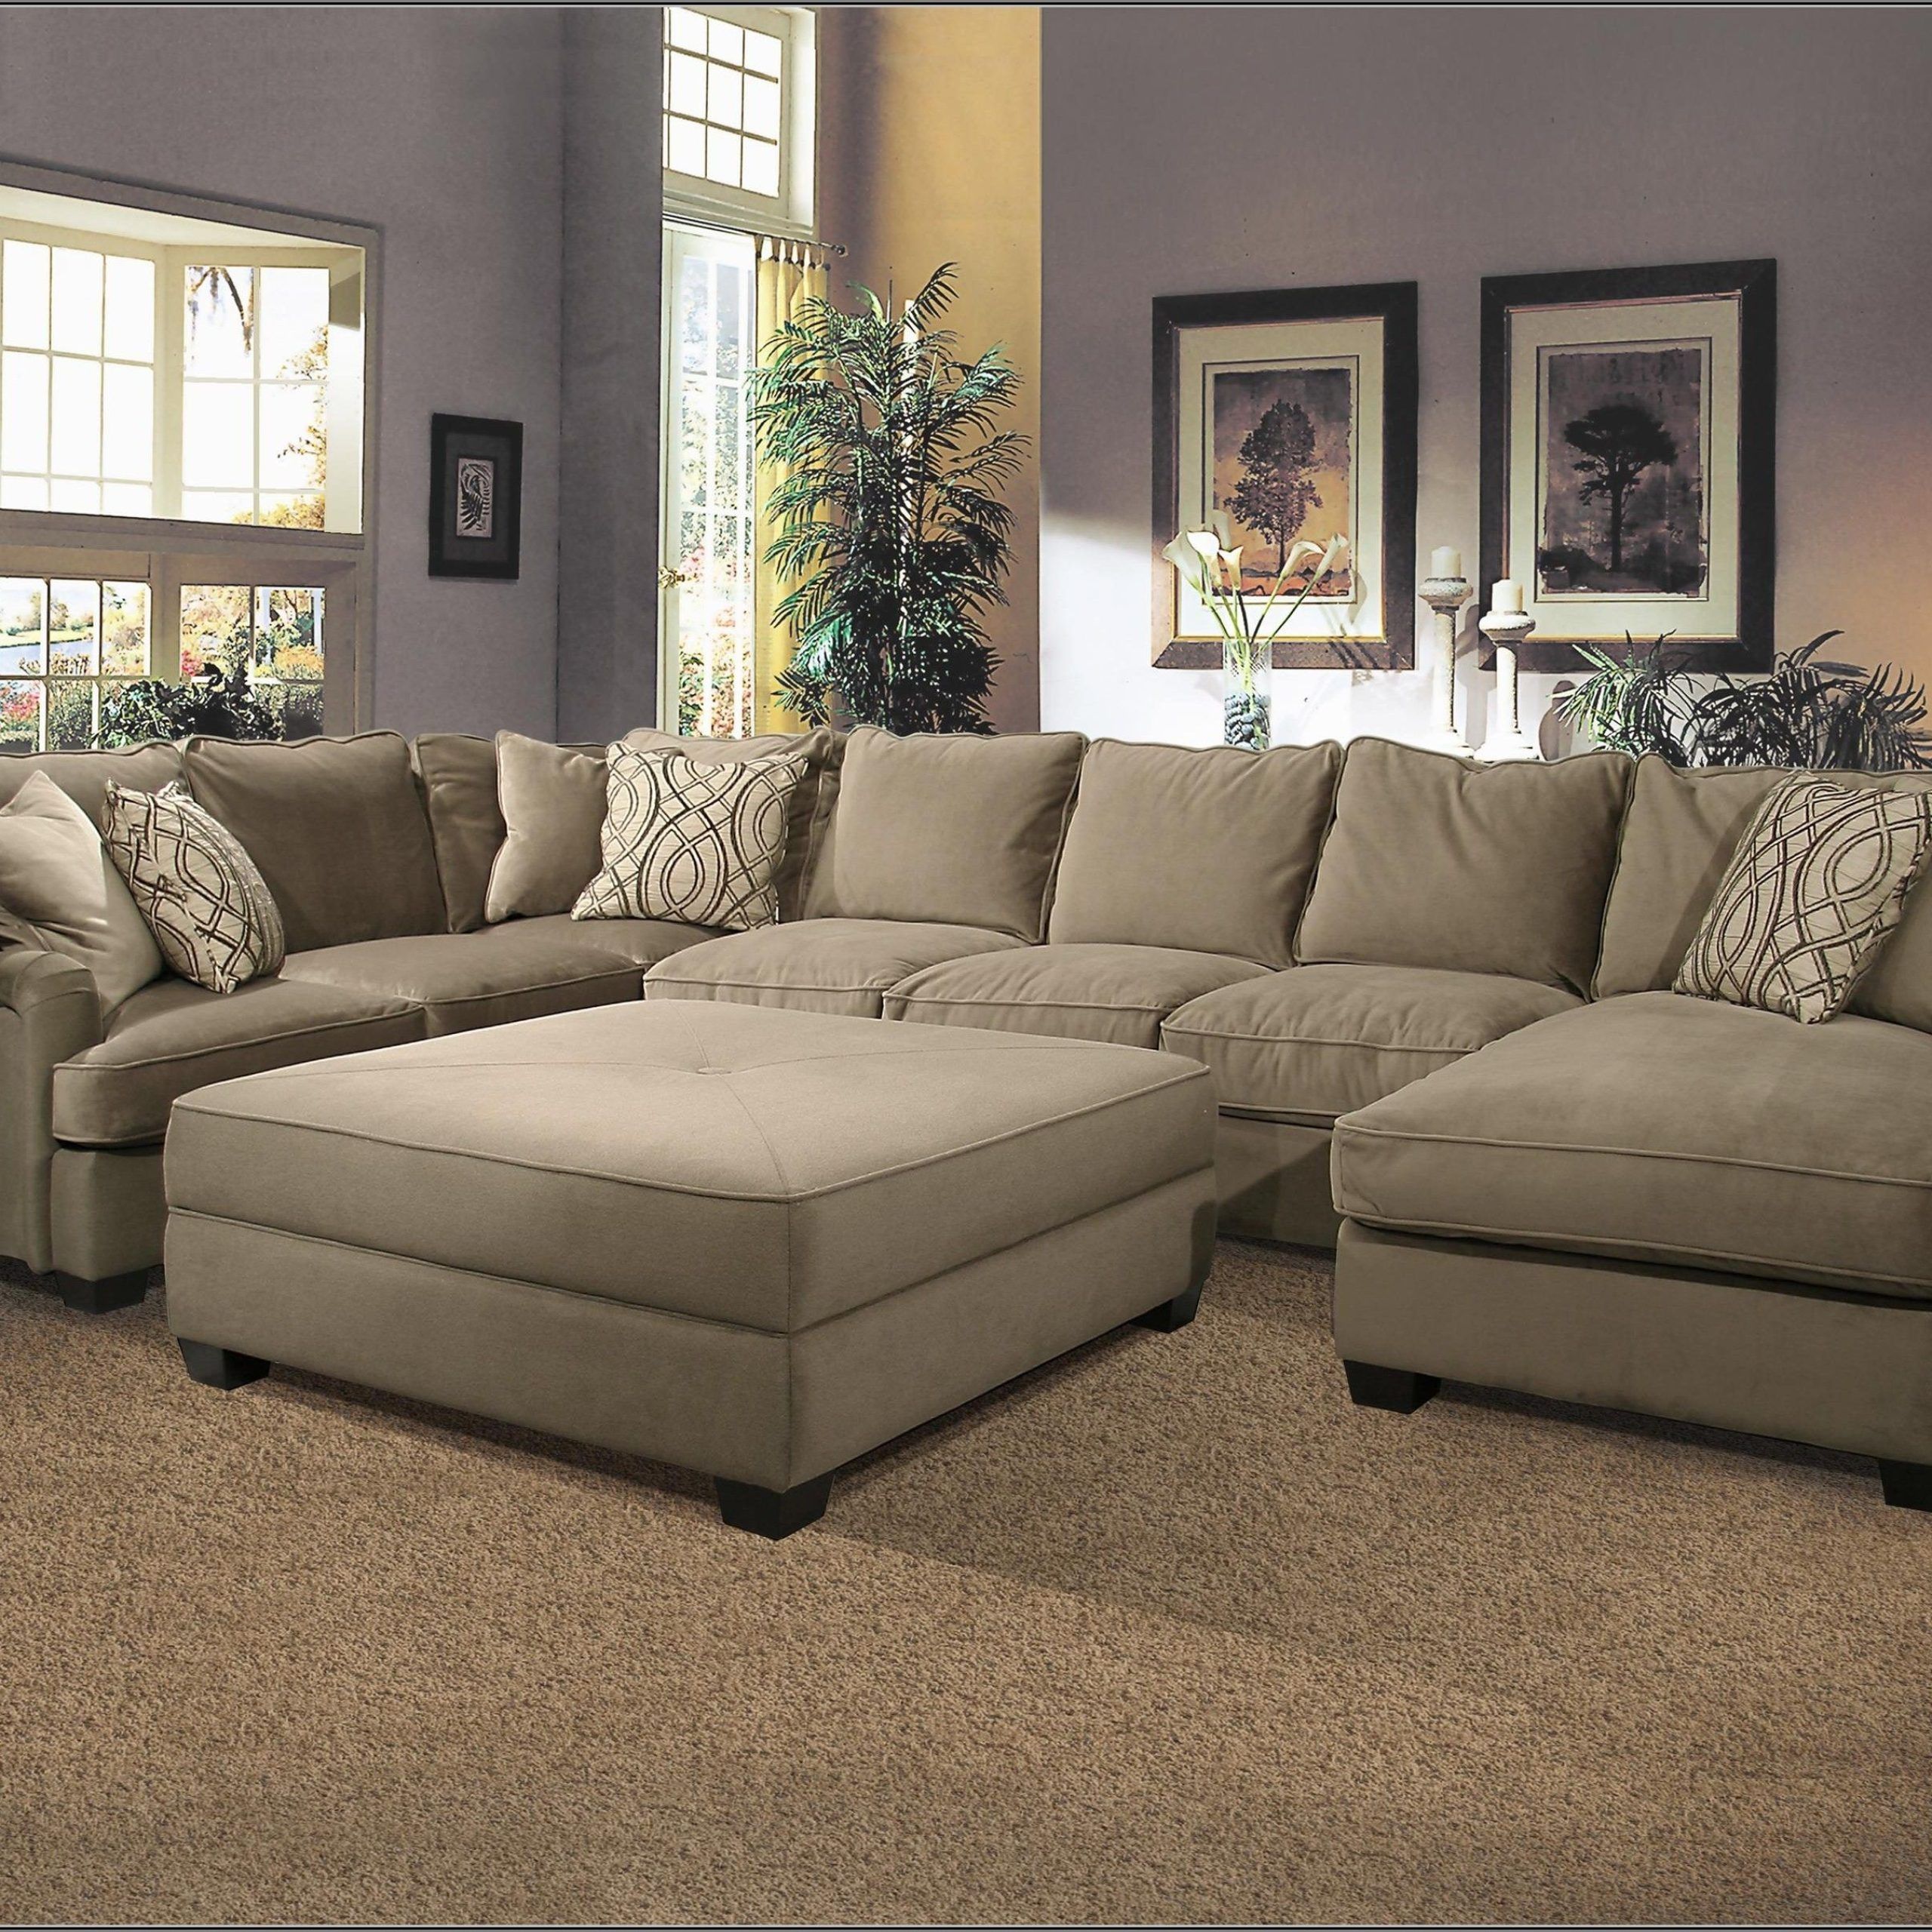 10 Ideas Of Big U Shaped Couches | Sofa Ideas Within U Shaped Couches In Beige (Gallery 20 of 20)